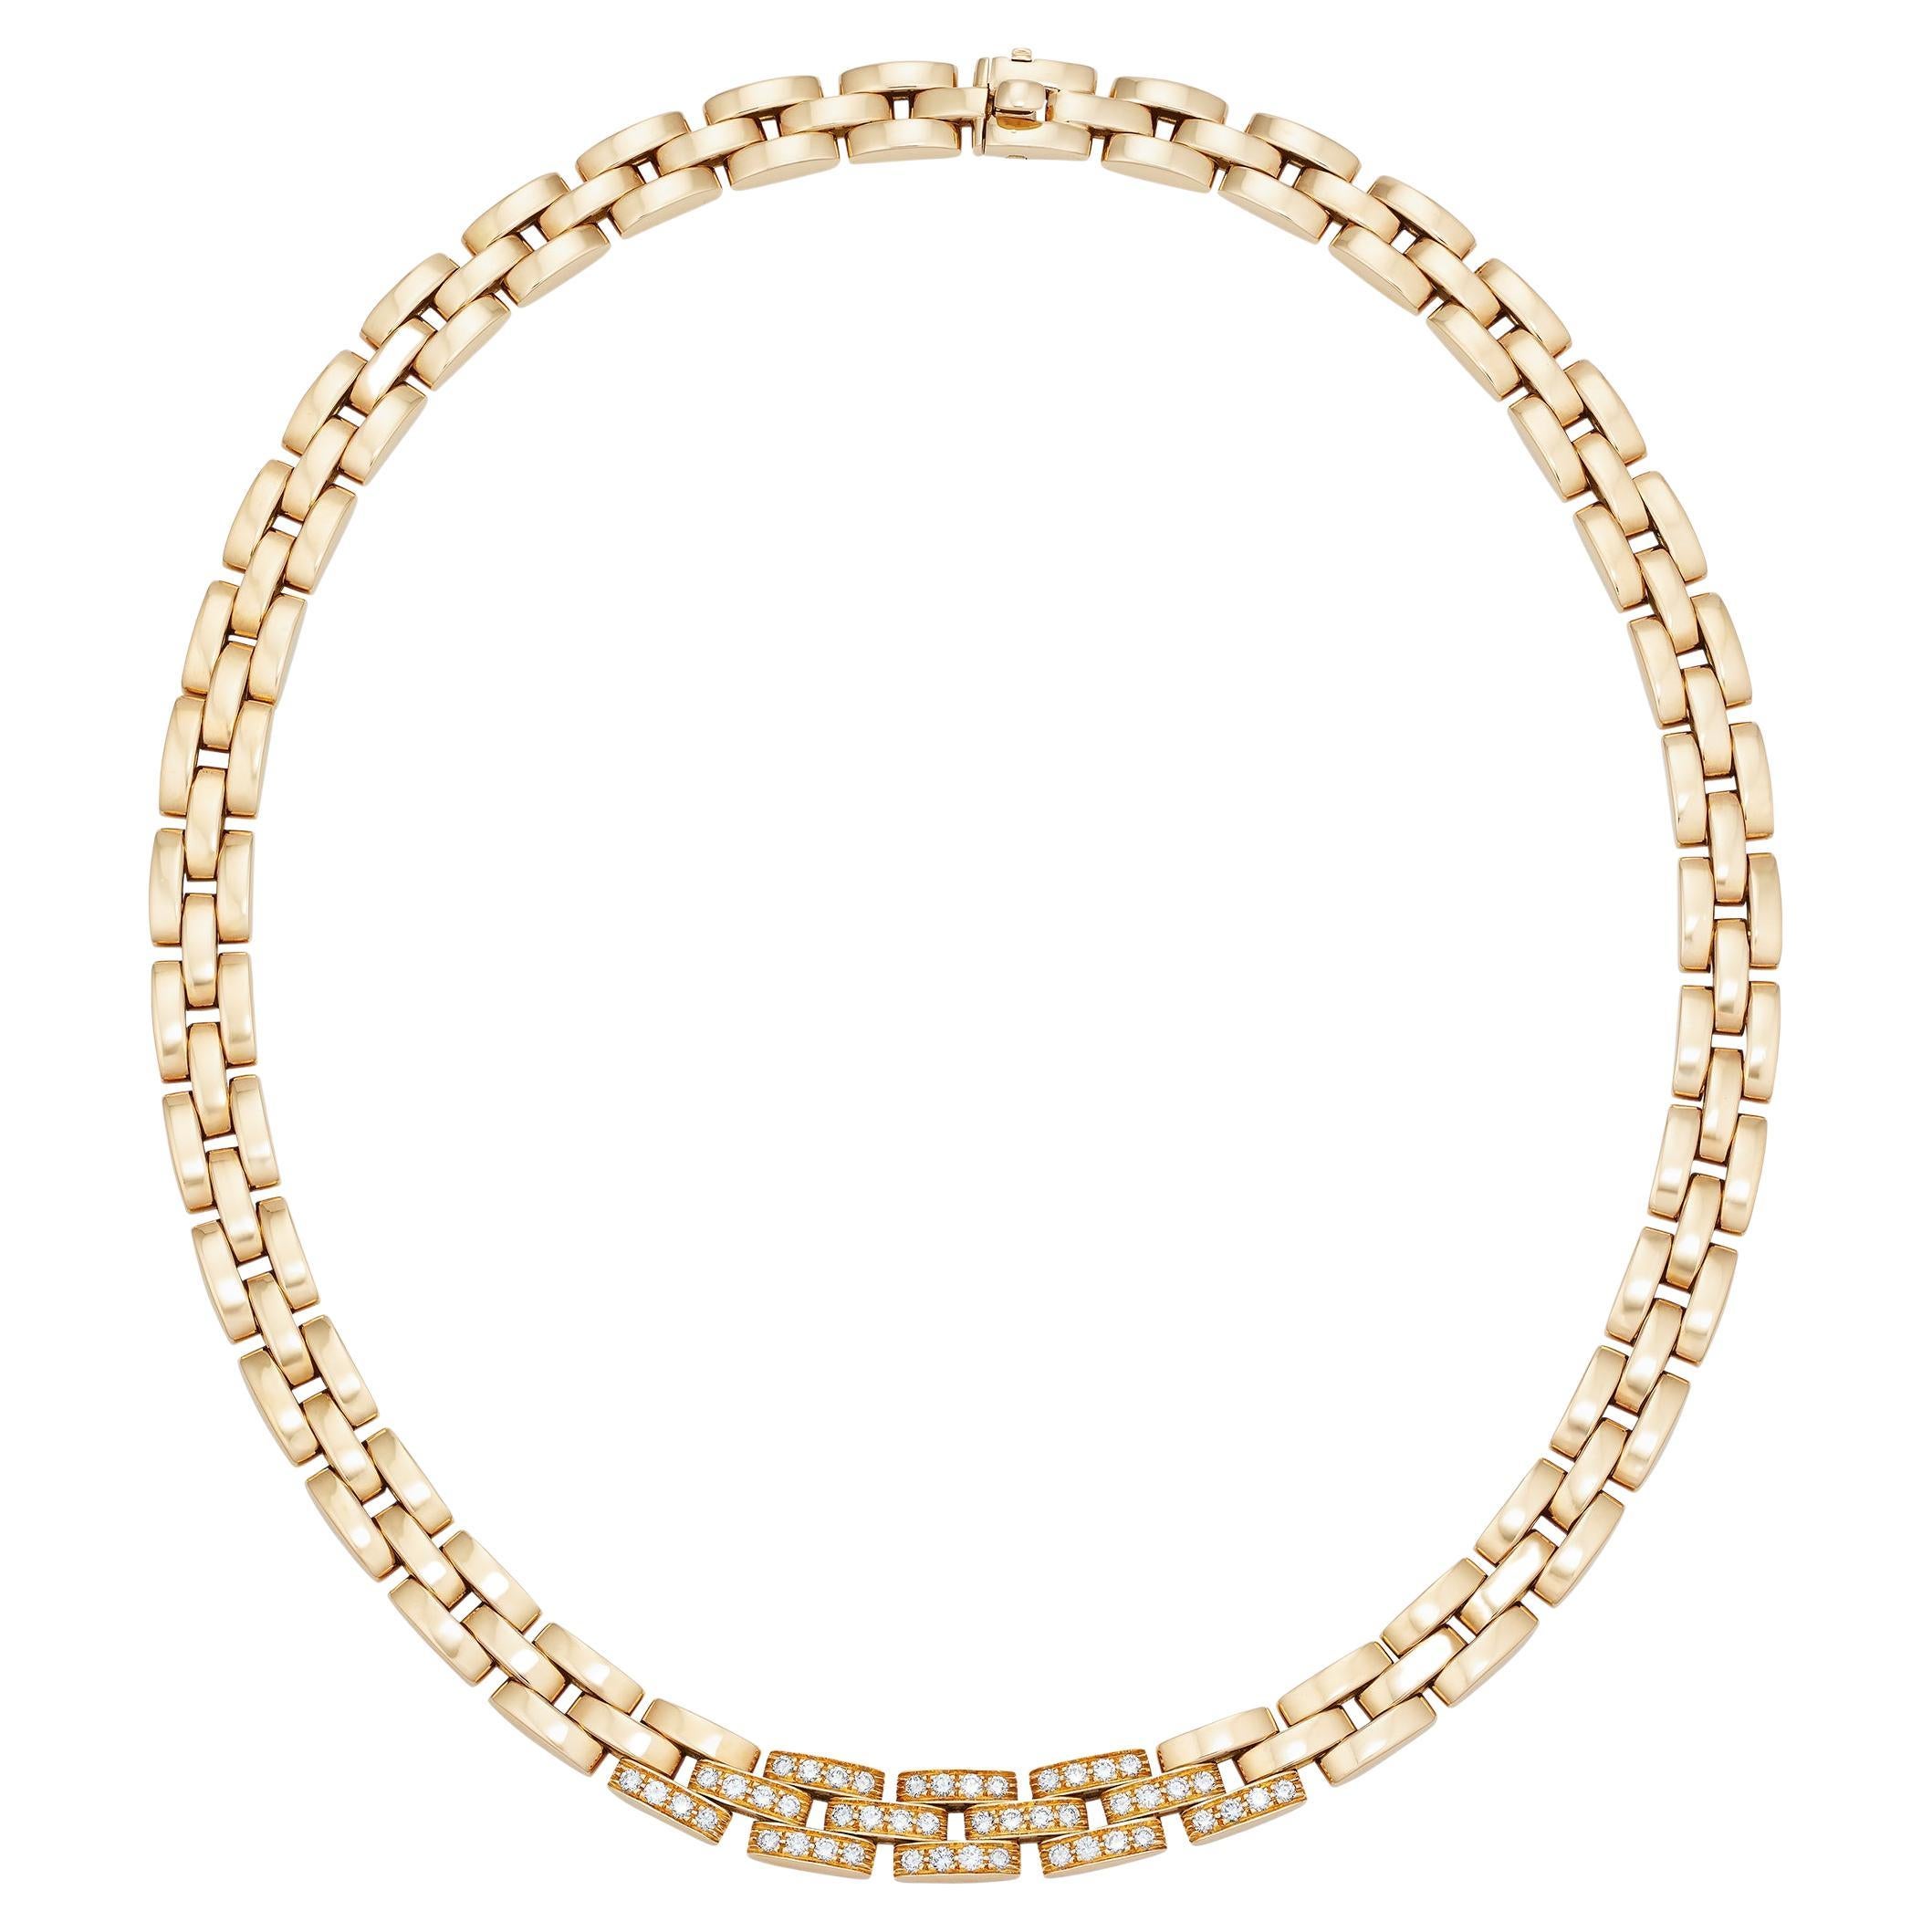 Cartier Maillon Panthere Diamond Necklace in 18K Yellow Gold